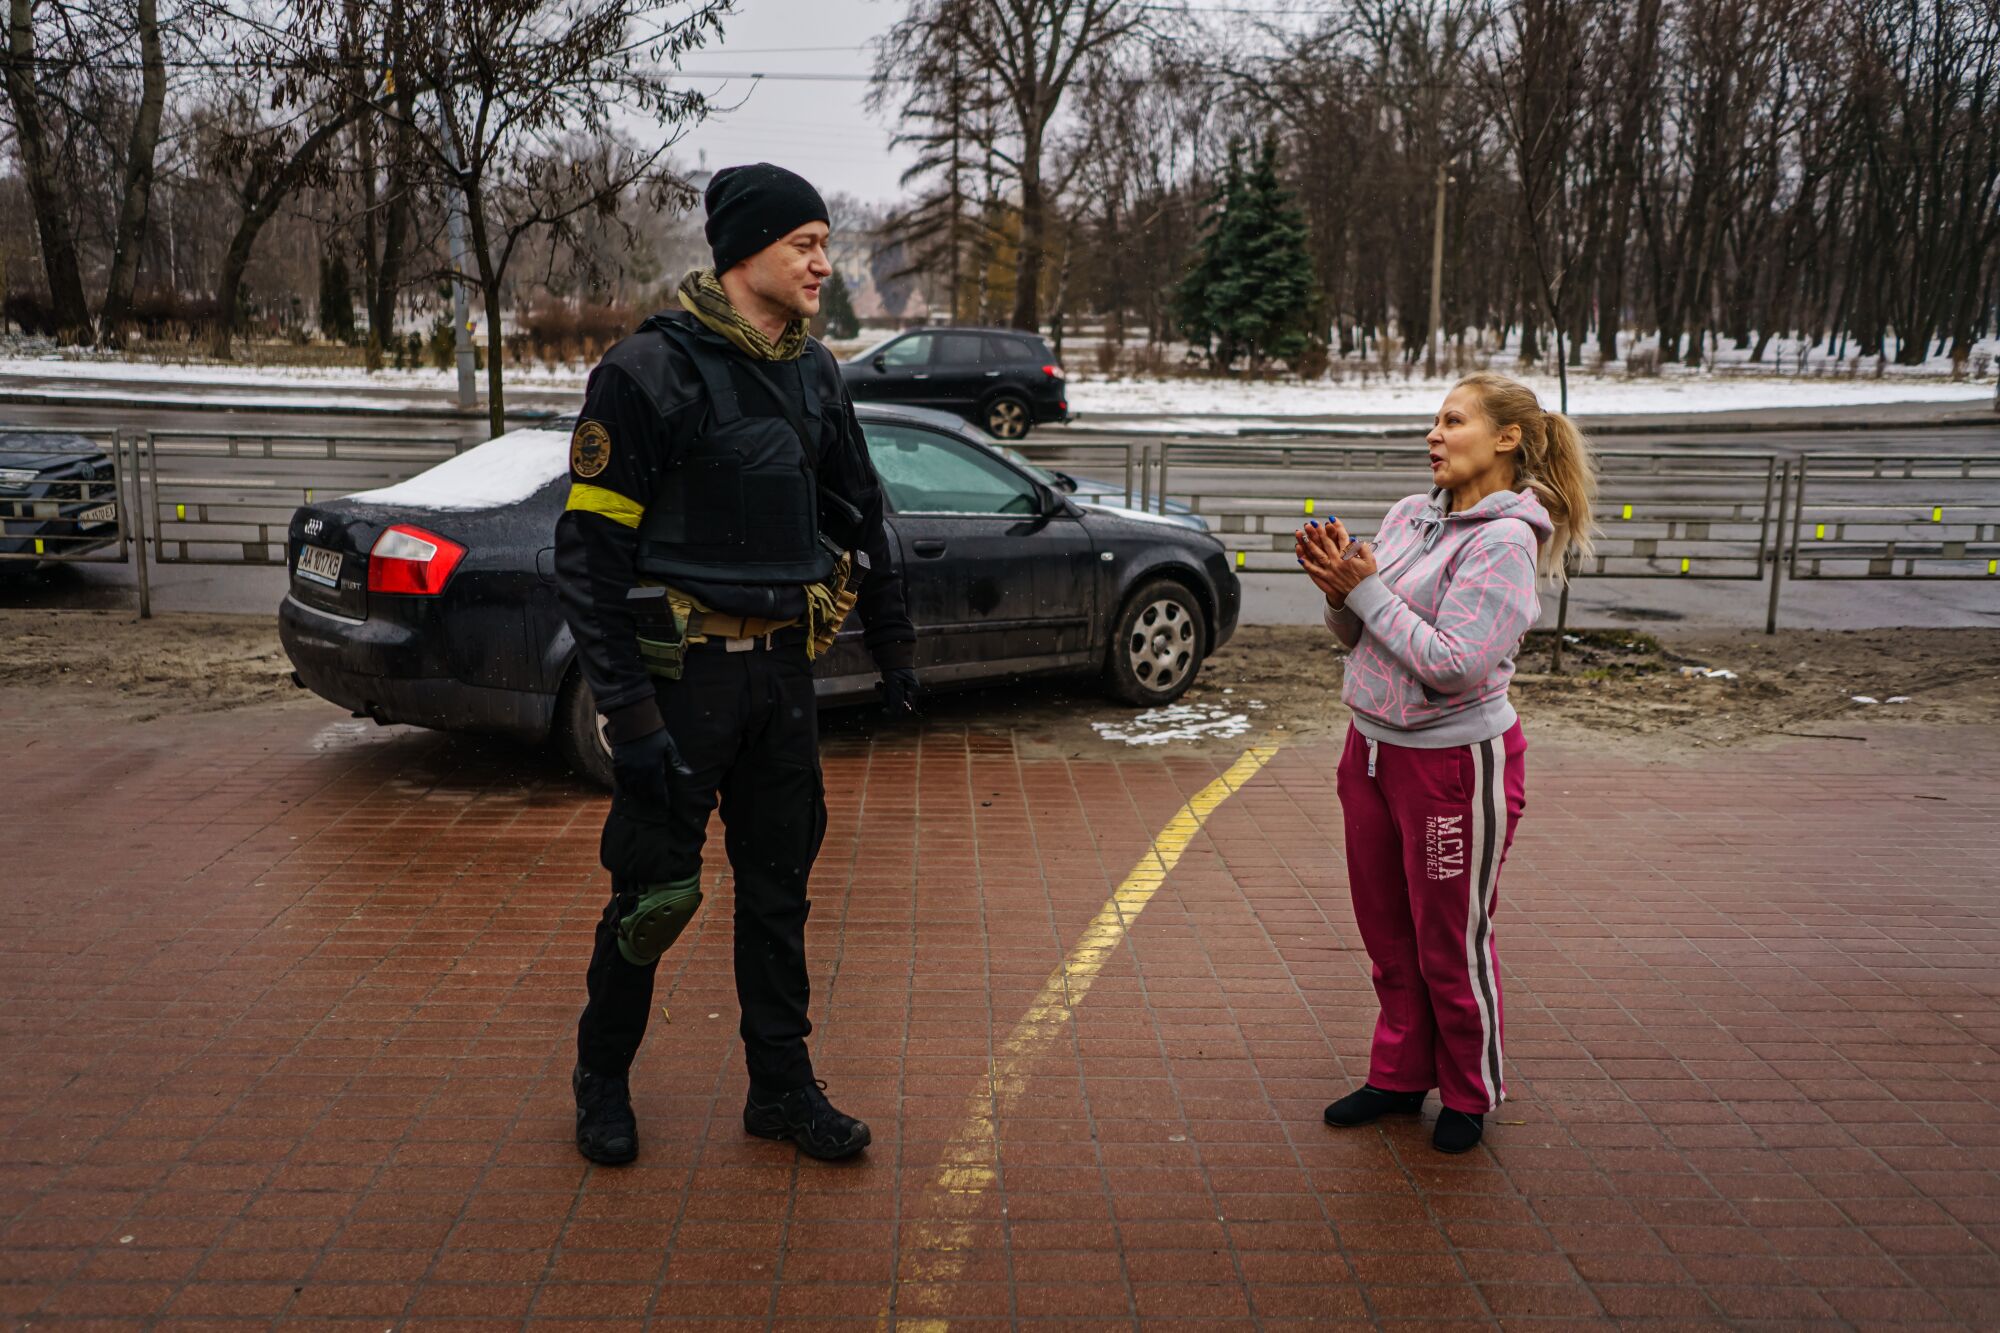 Andriy Khlyvnyuk, a Ukrainian rock star who joined the armed forces, is greeted by a fan in Kyiv